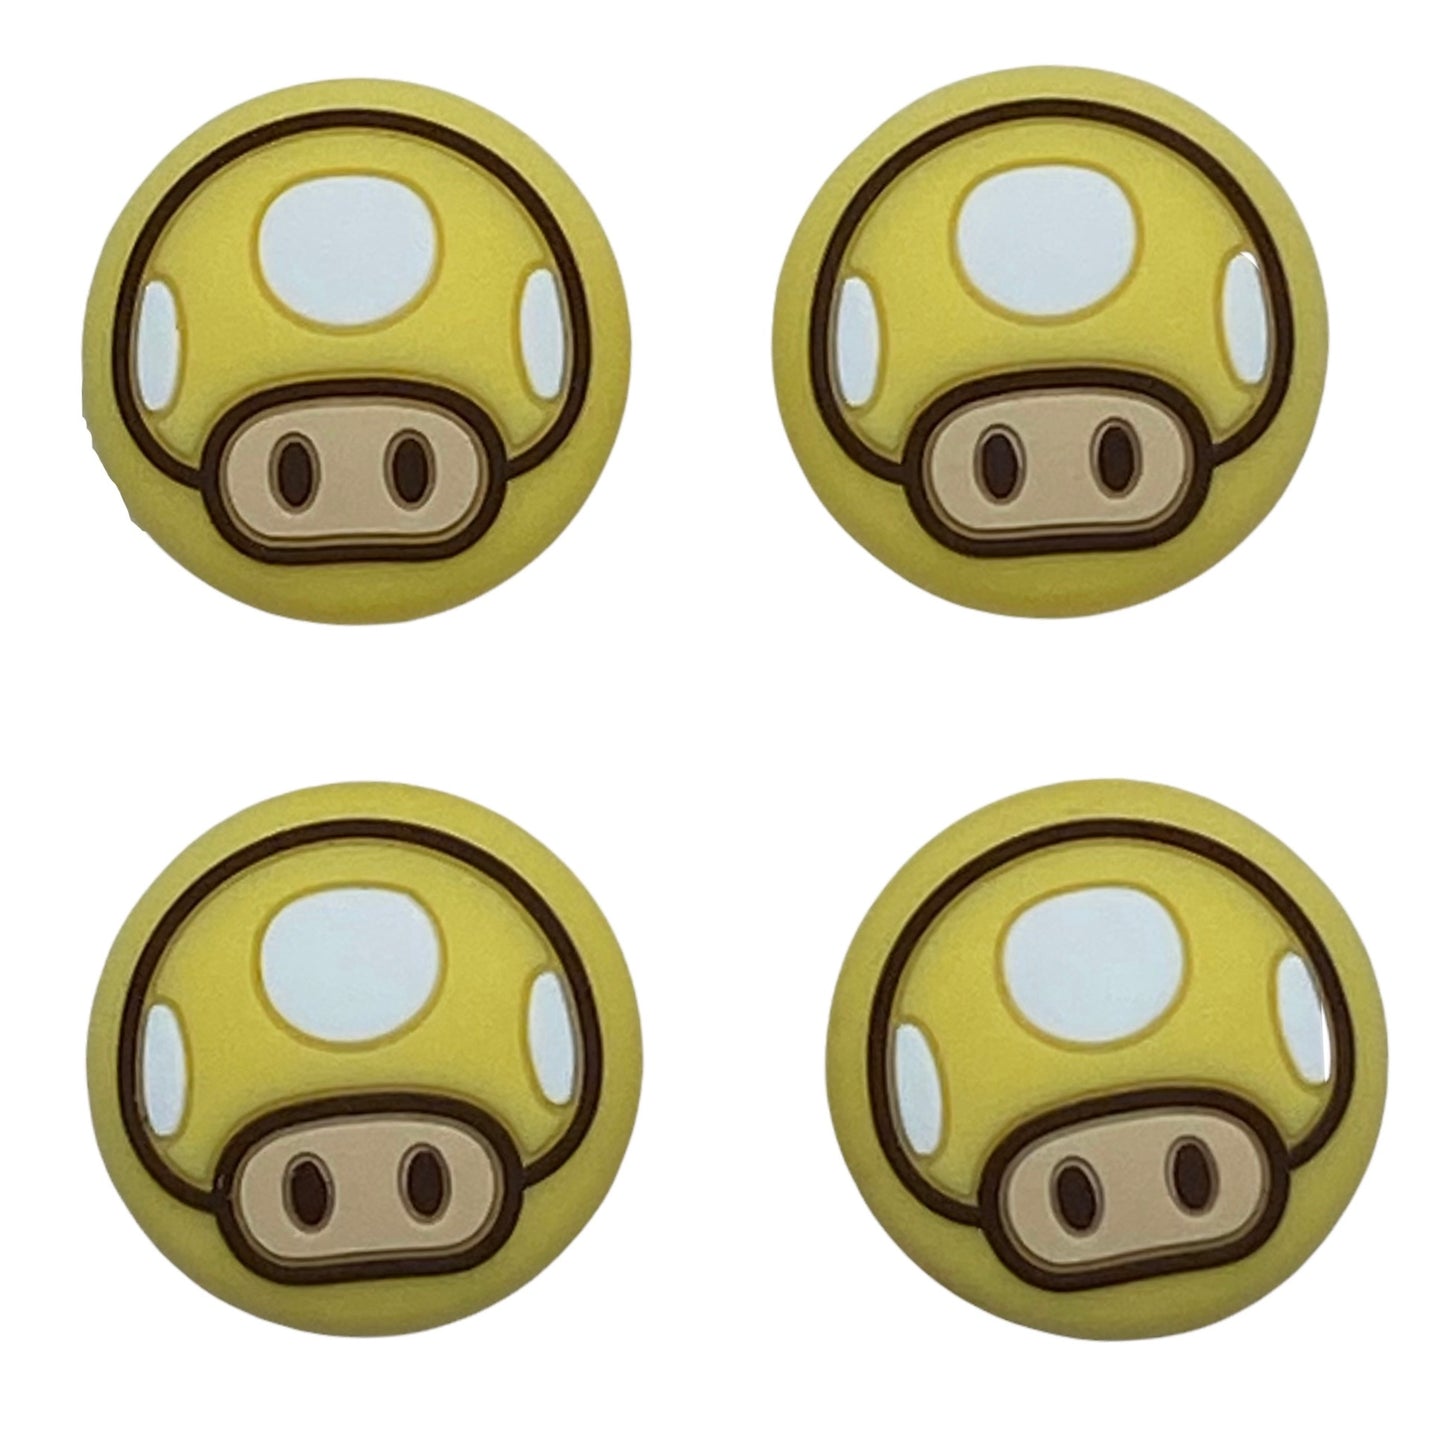 JenDore Yellow Mushrooms 4Pcs Silicone Thumb Grip Caps for Nintendo Switch